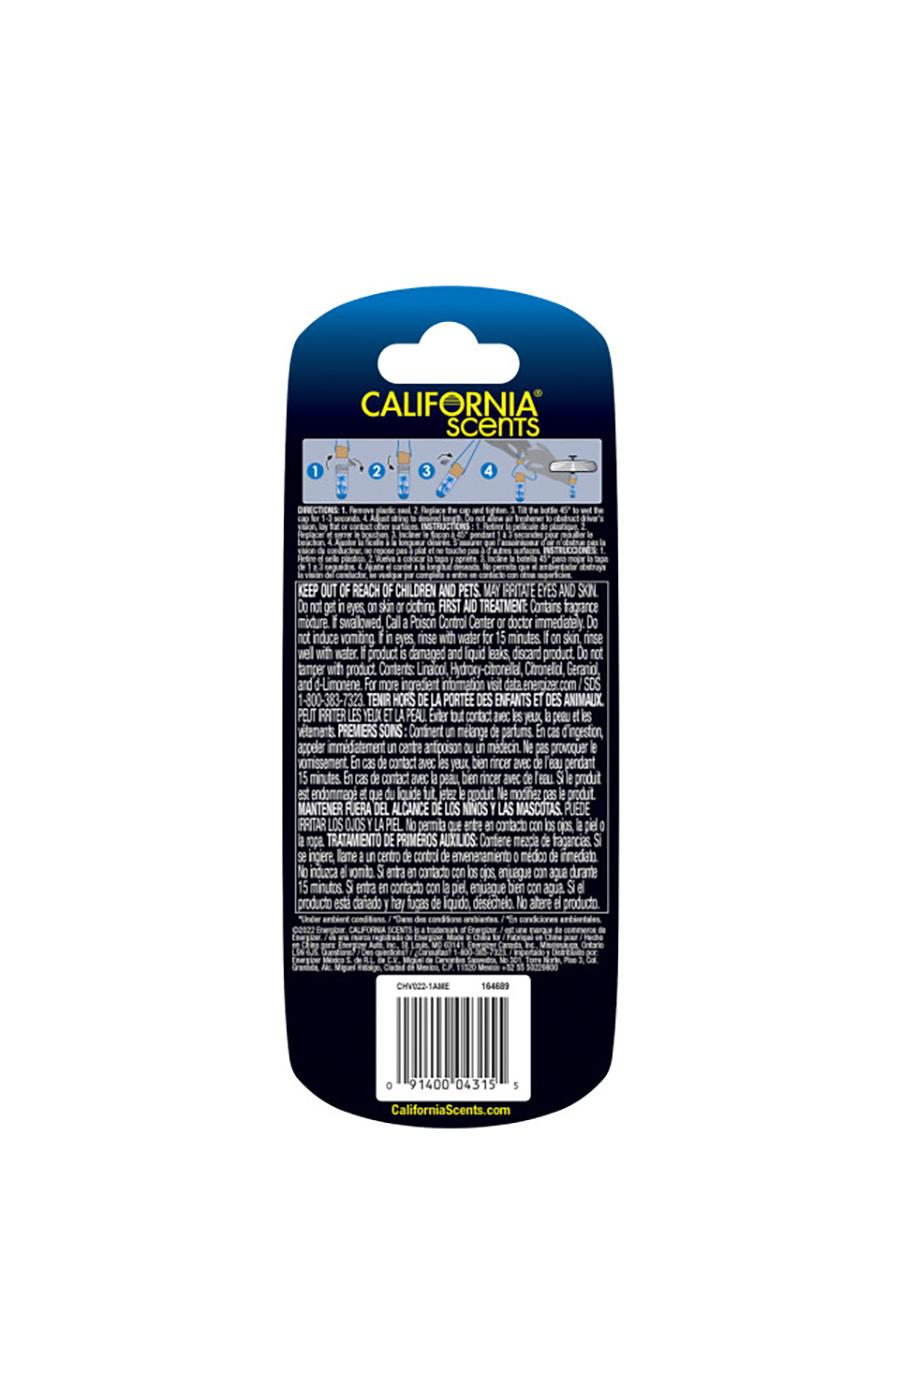 California Scents Hanging Vial Auto Air Freshener - Newport New Car; image 2 of 2